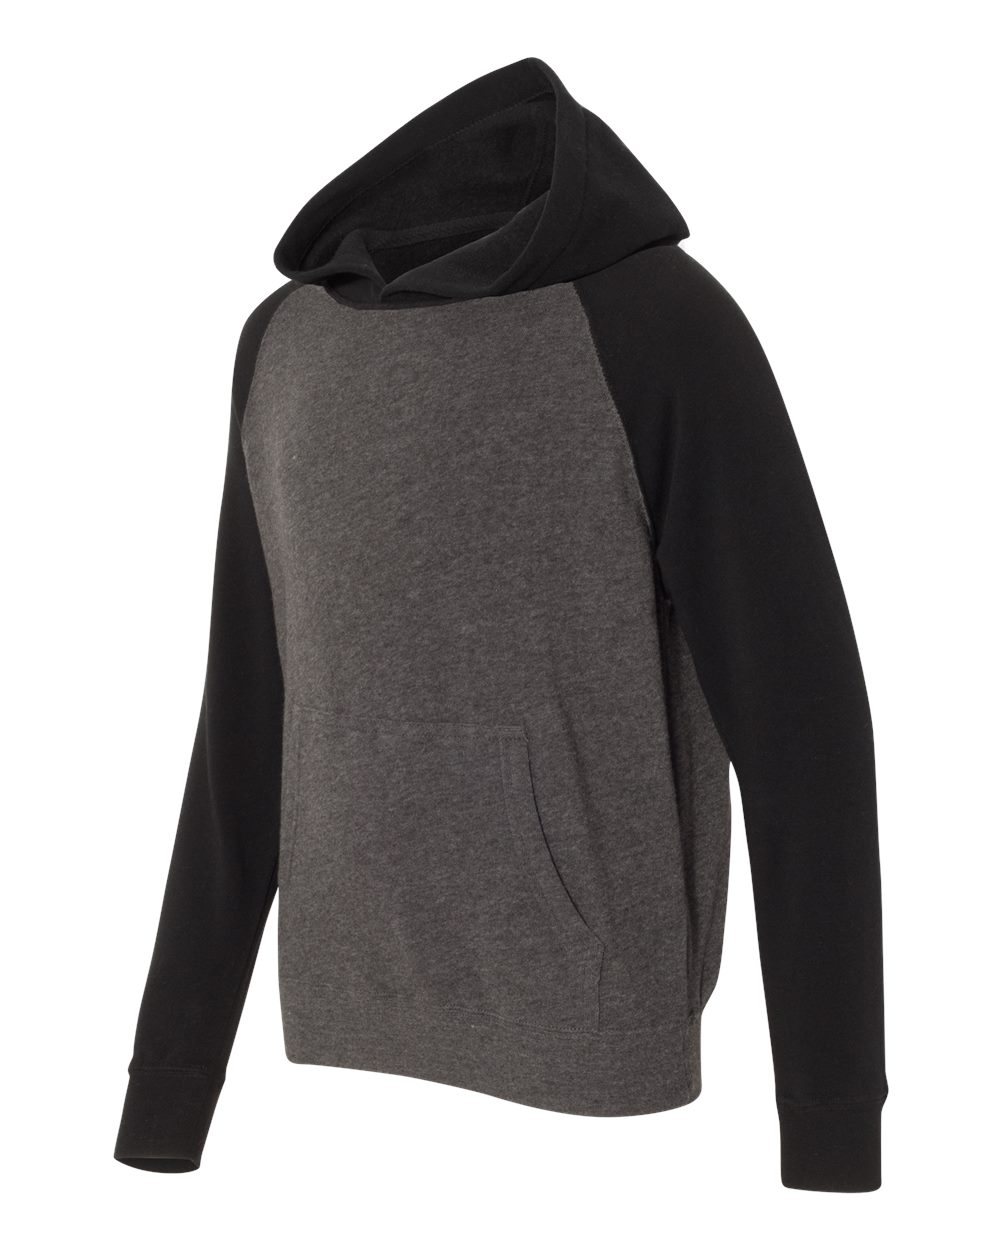 Independent Trading Co. PRM15YSB - Youth Special Blend Raglan Hooded Pullover